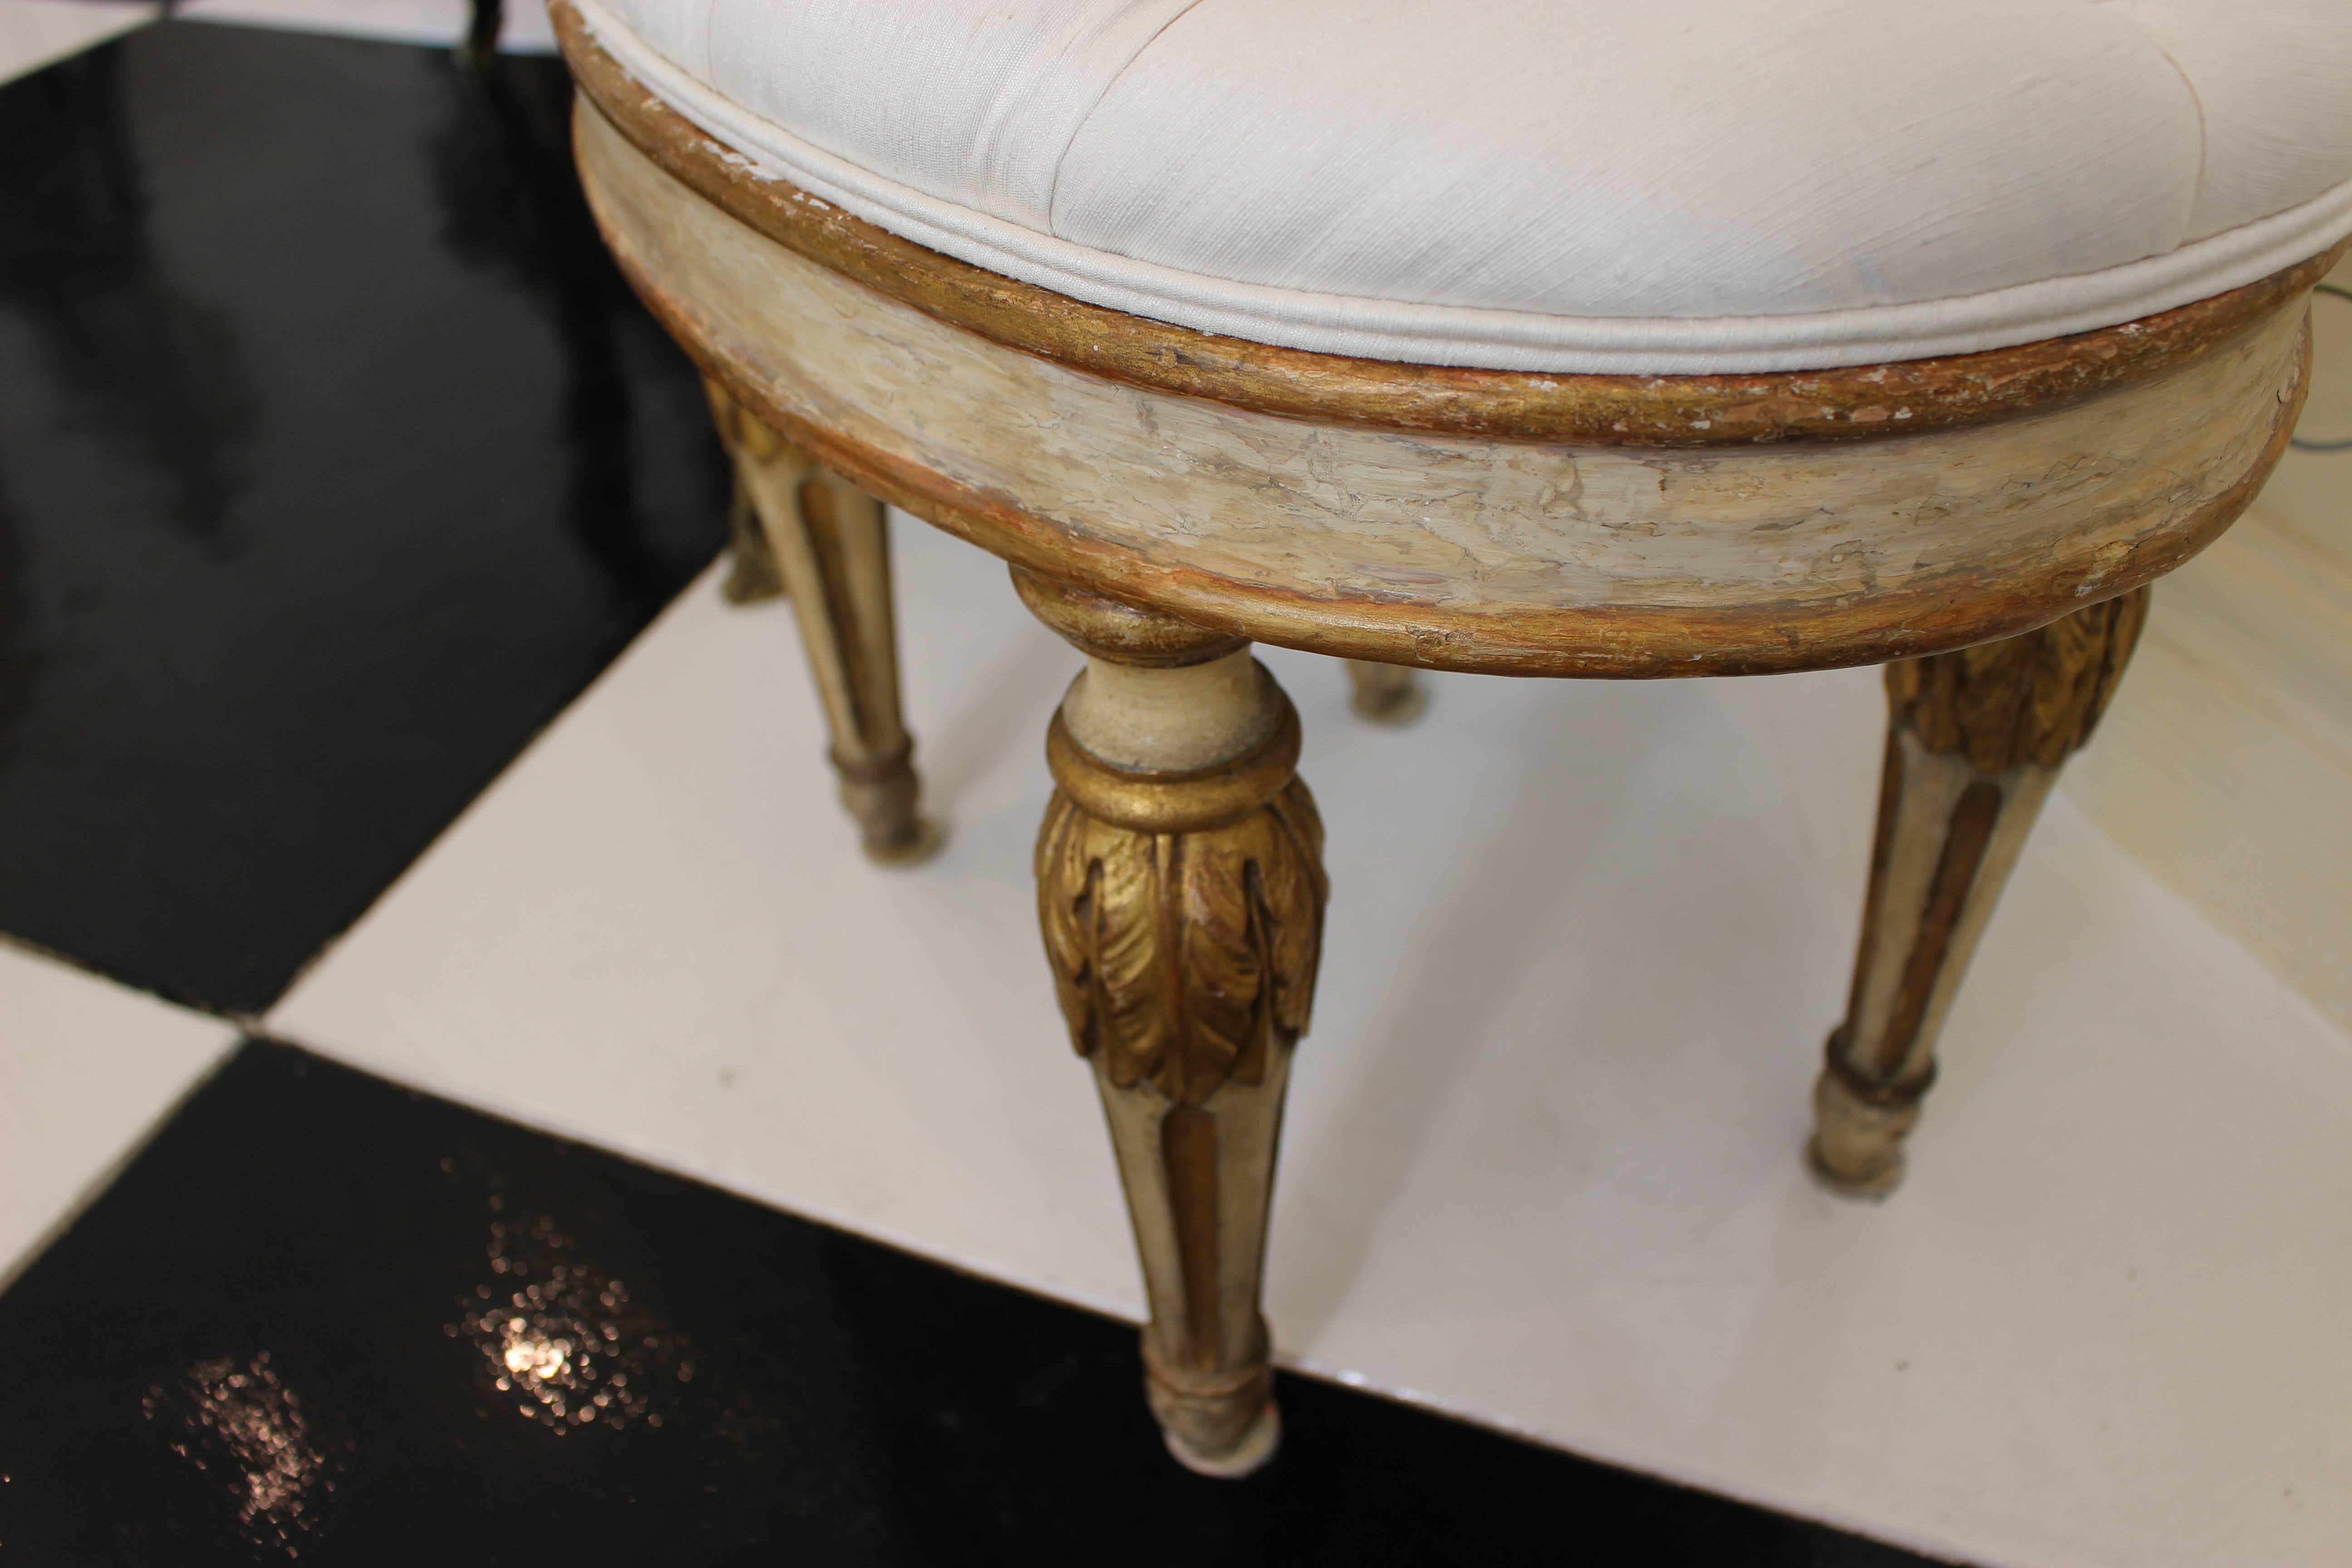 A pair of Italian Neoclassical period oval stools from the 18th century with white-painted bodies, parcel-gilt accents and upholstered seats. Born in the later years of the 18th century, each of this pair of Italian stools features an oval buttoned